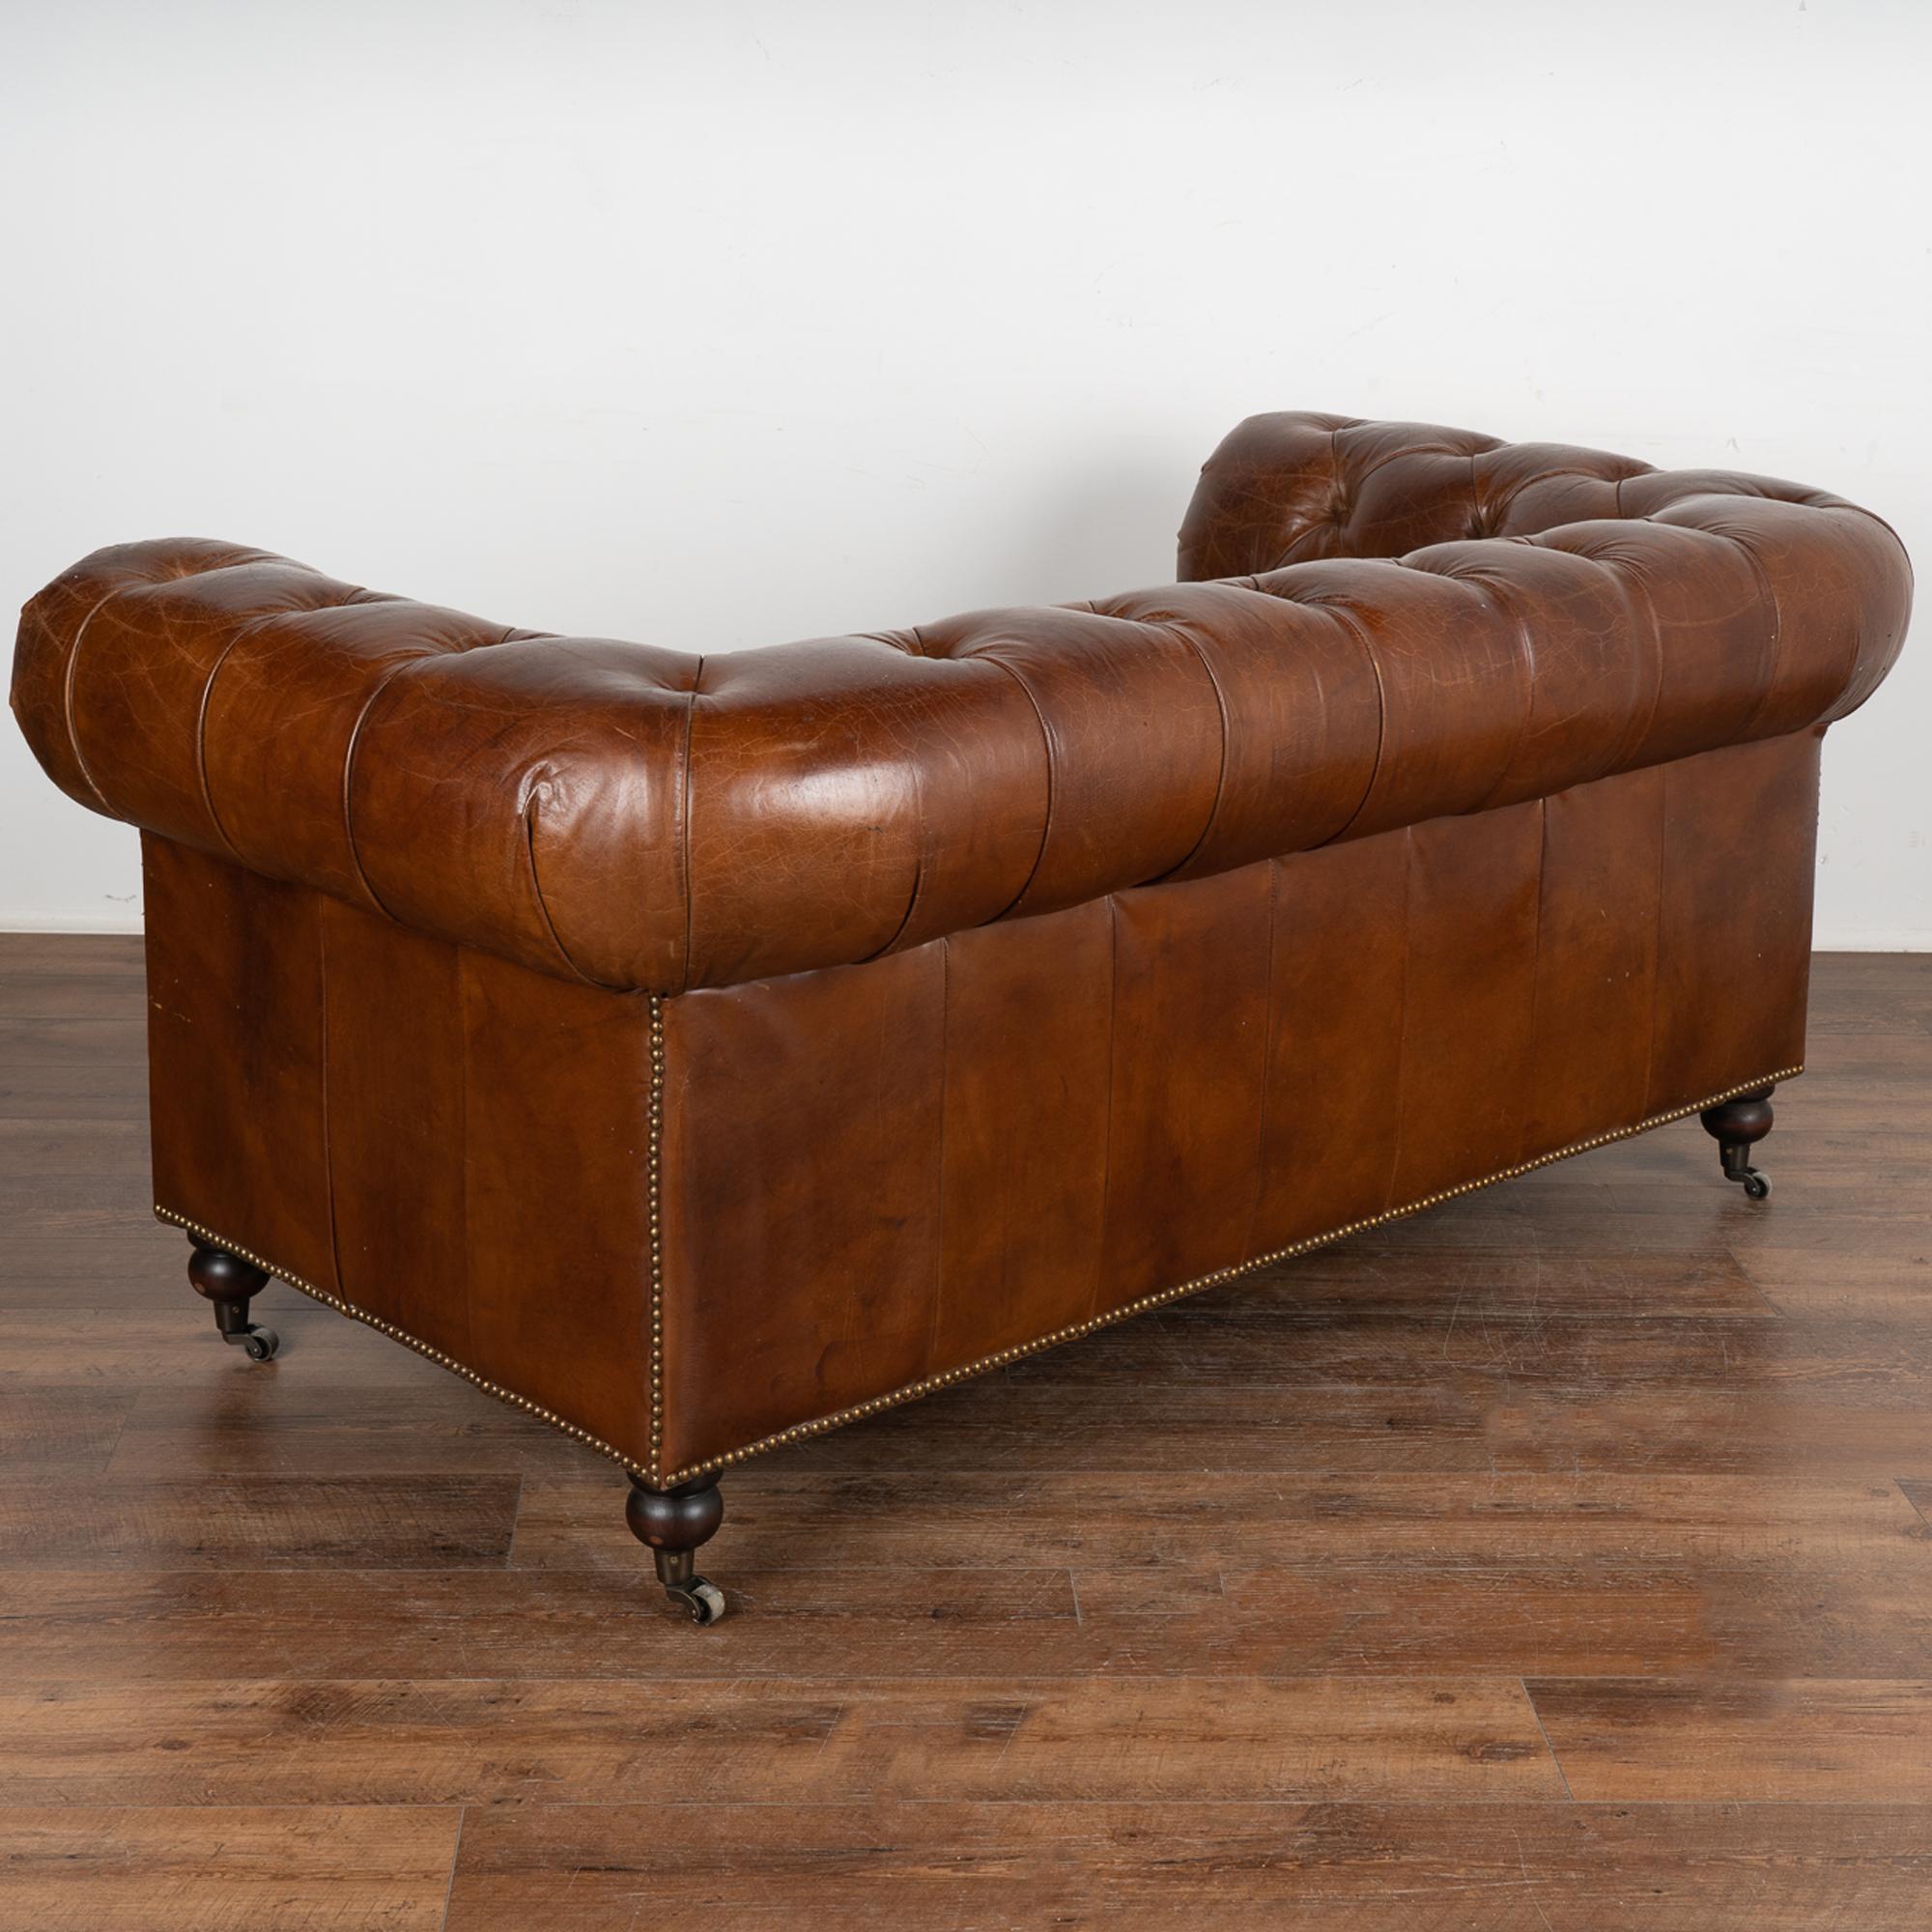 Vintage Brown Leather Chesterfield Two Seat Sofa Loveseat, England circa 1960-80 6